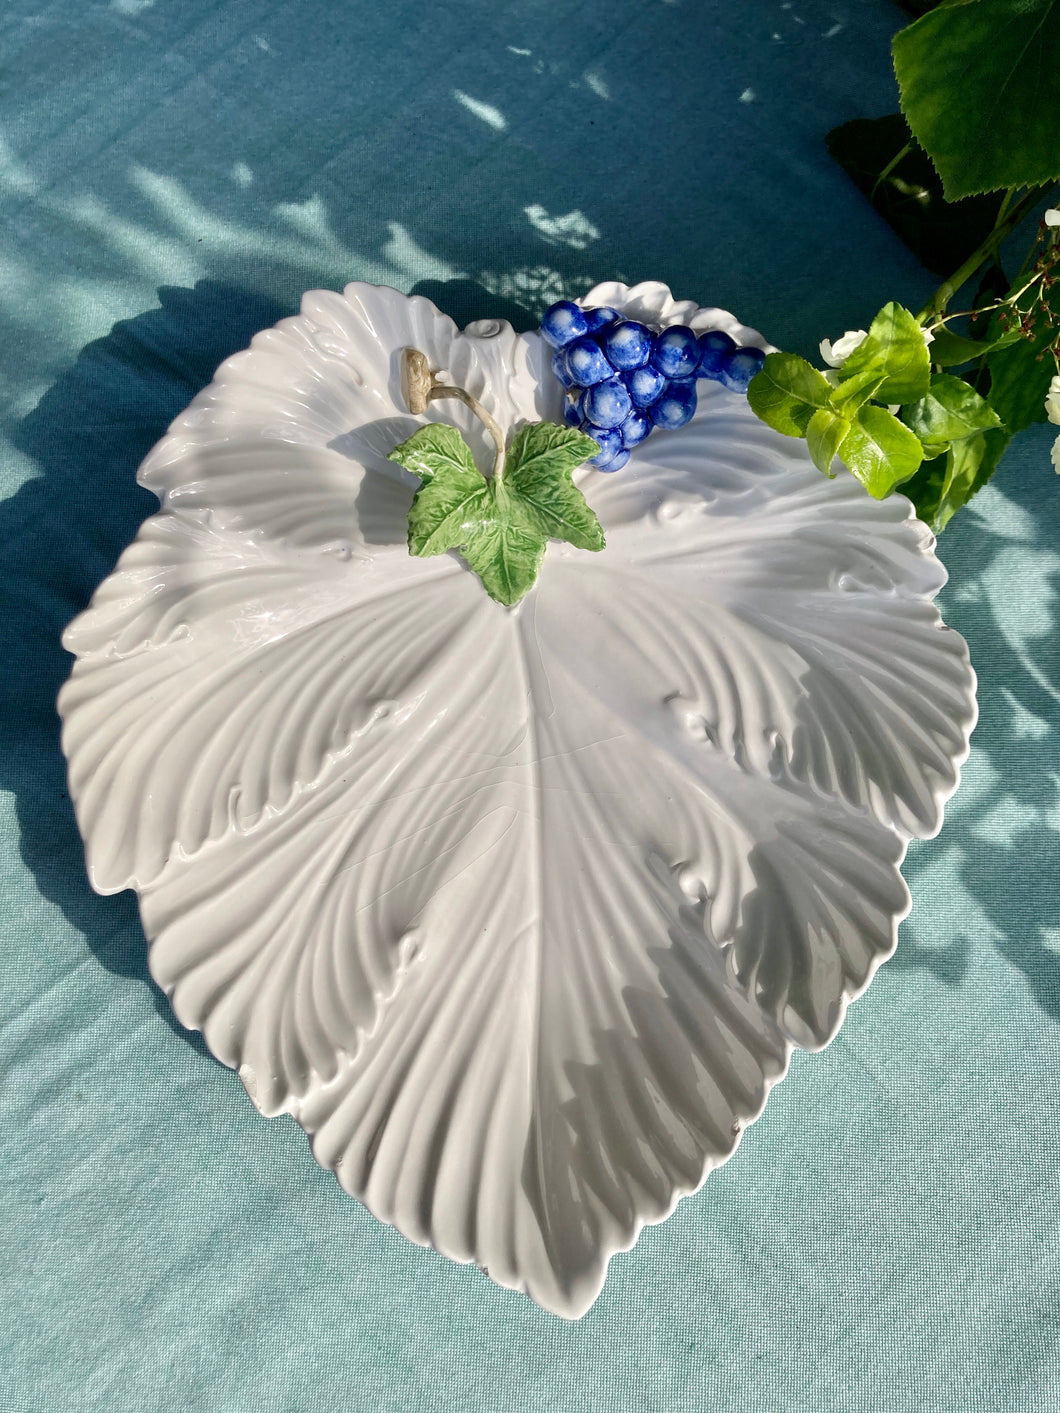 Large white vine leaf Italian dish with grapes